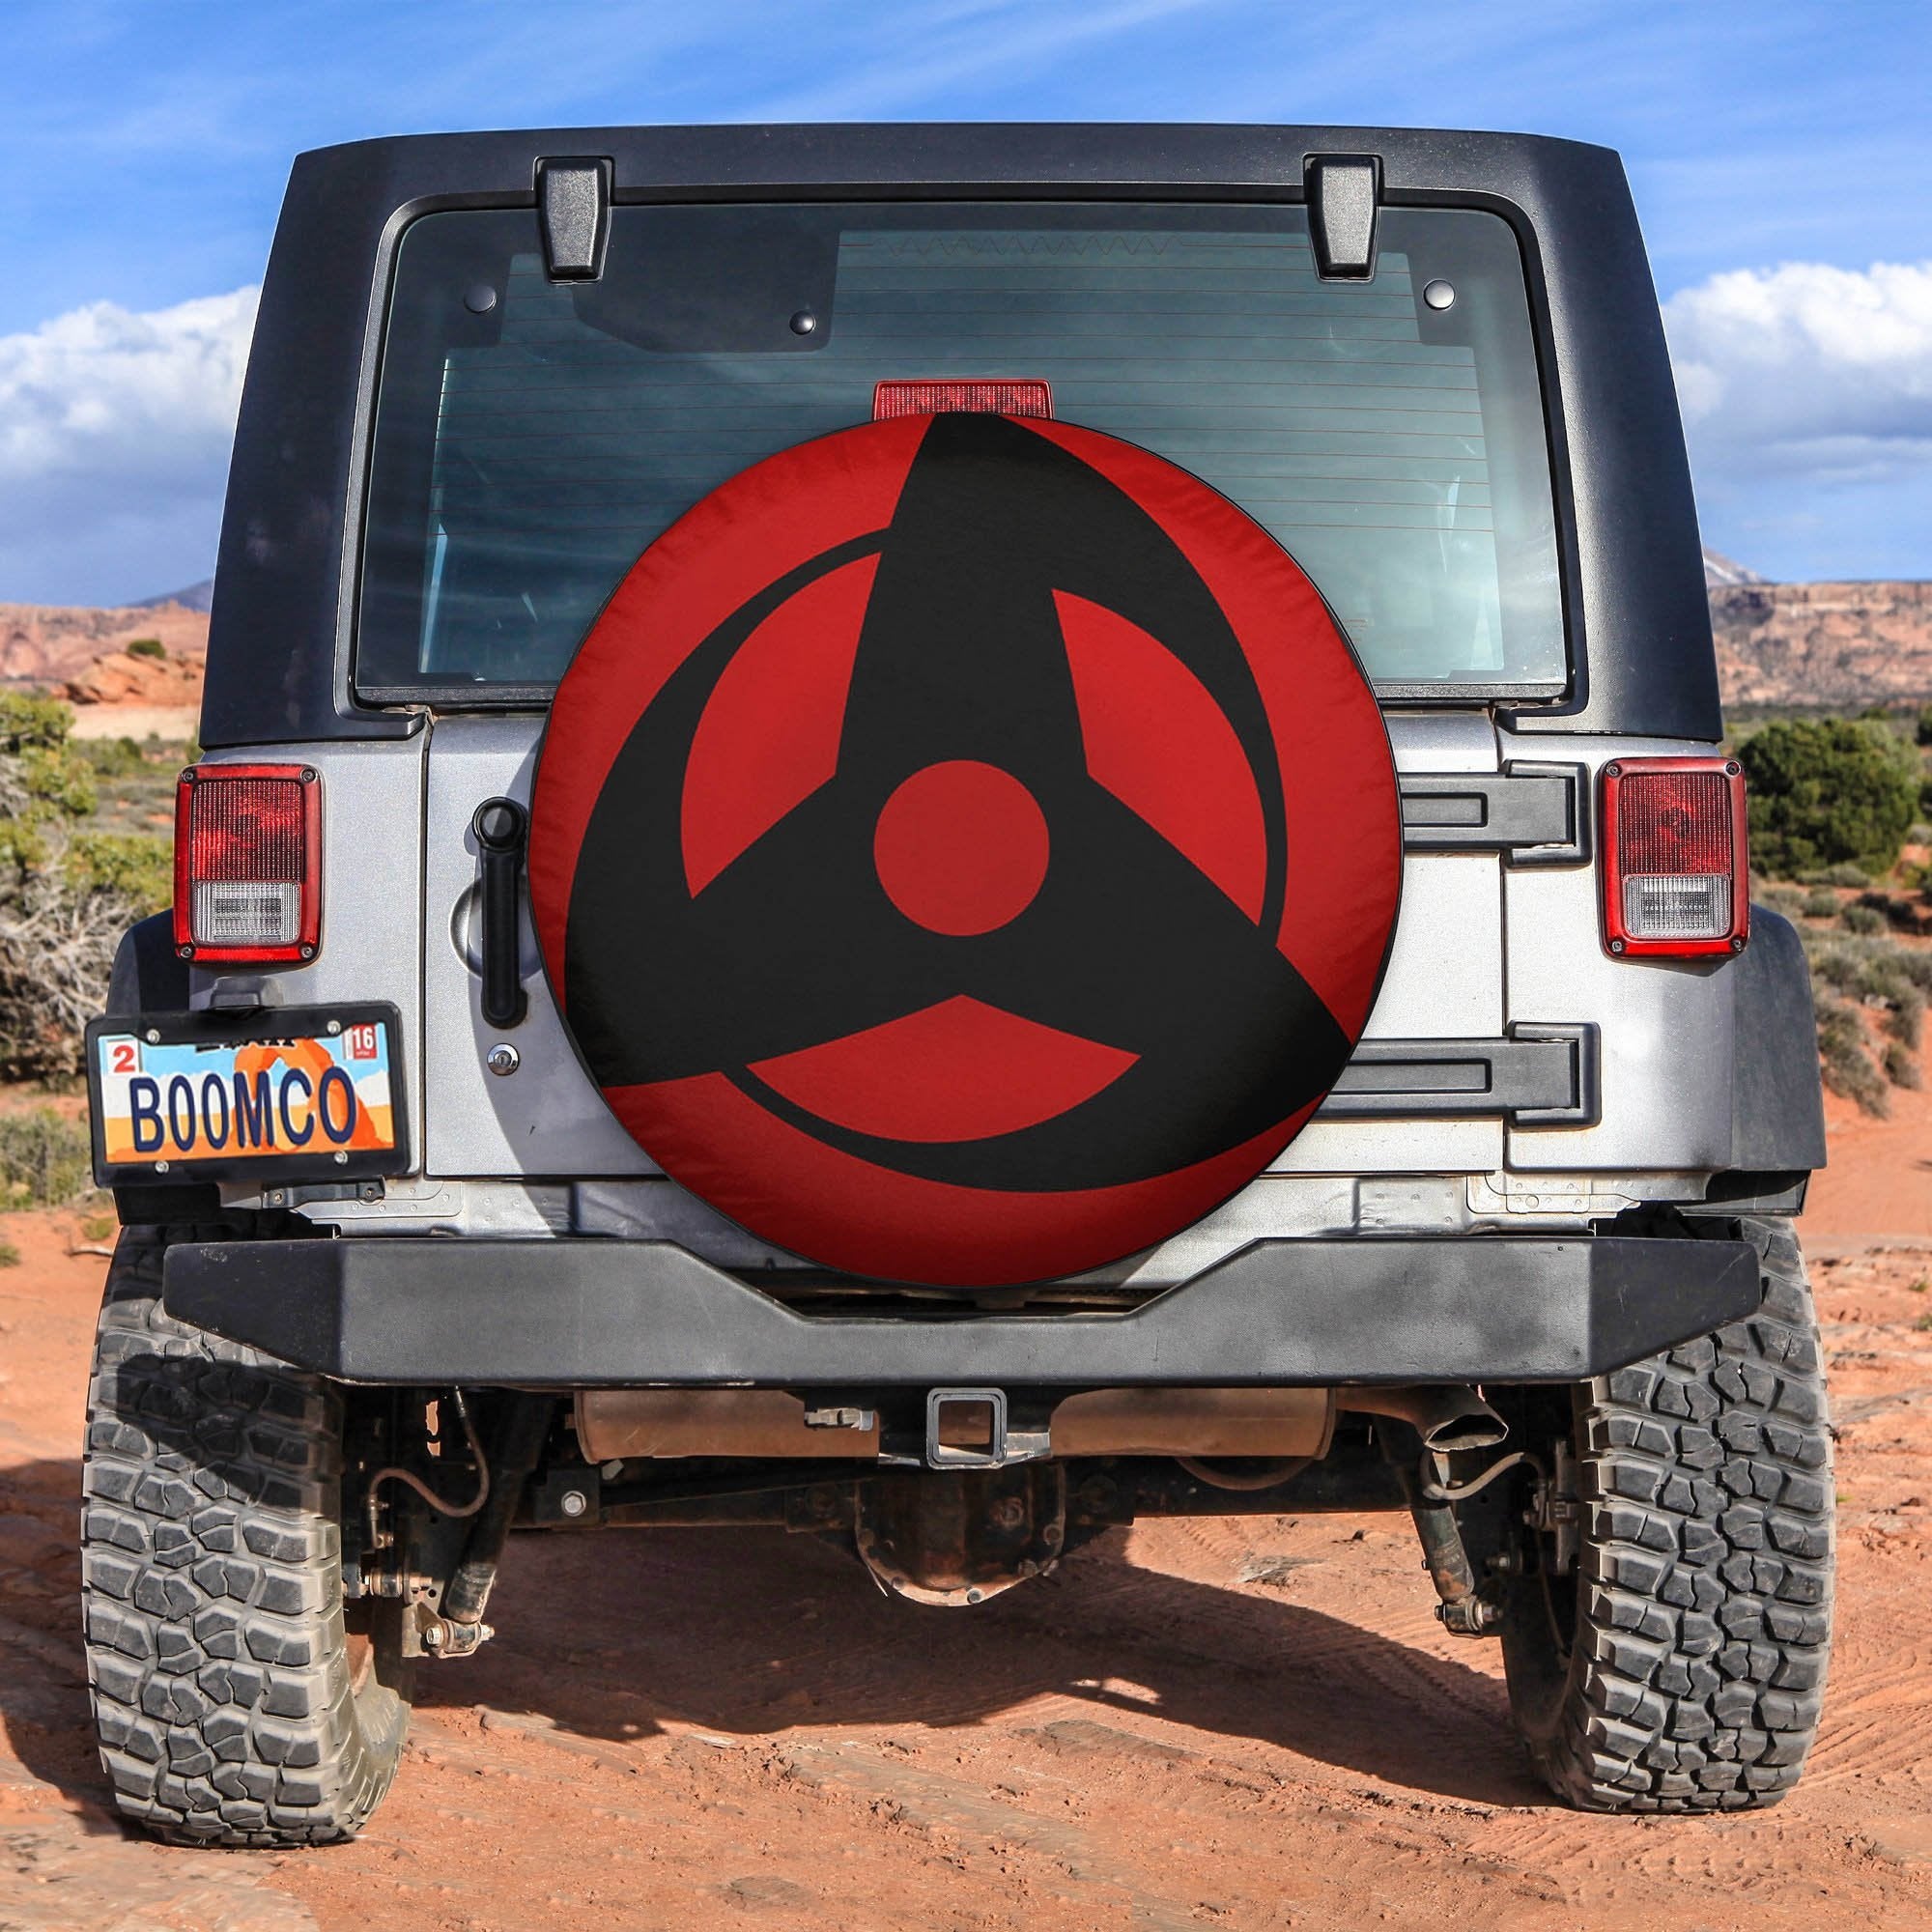 Kakashi Sharingan Spare Tire Covers Gift For Campers